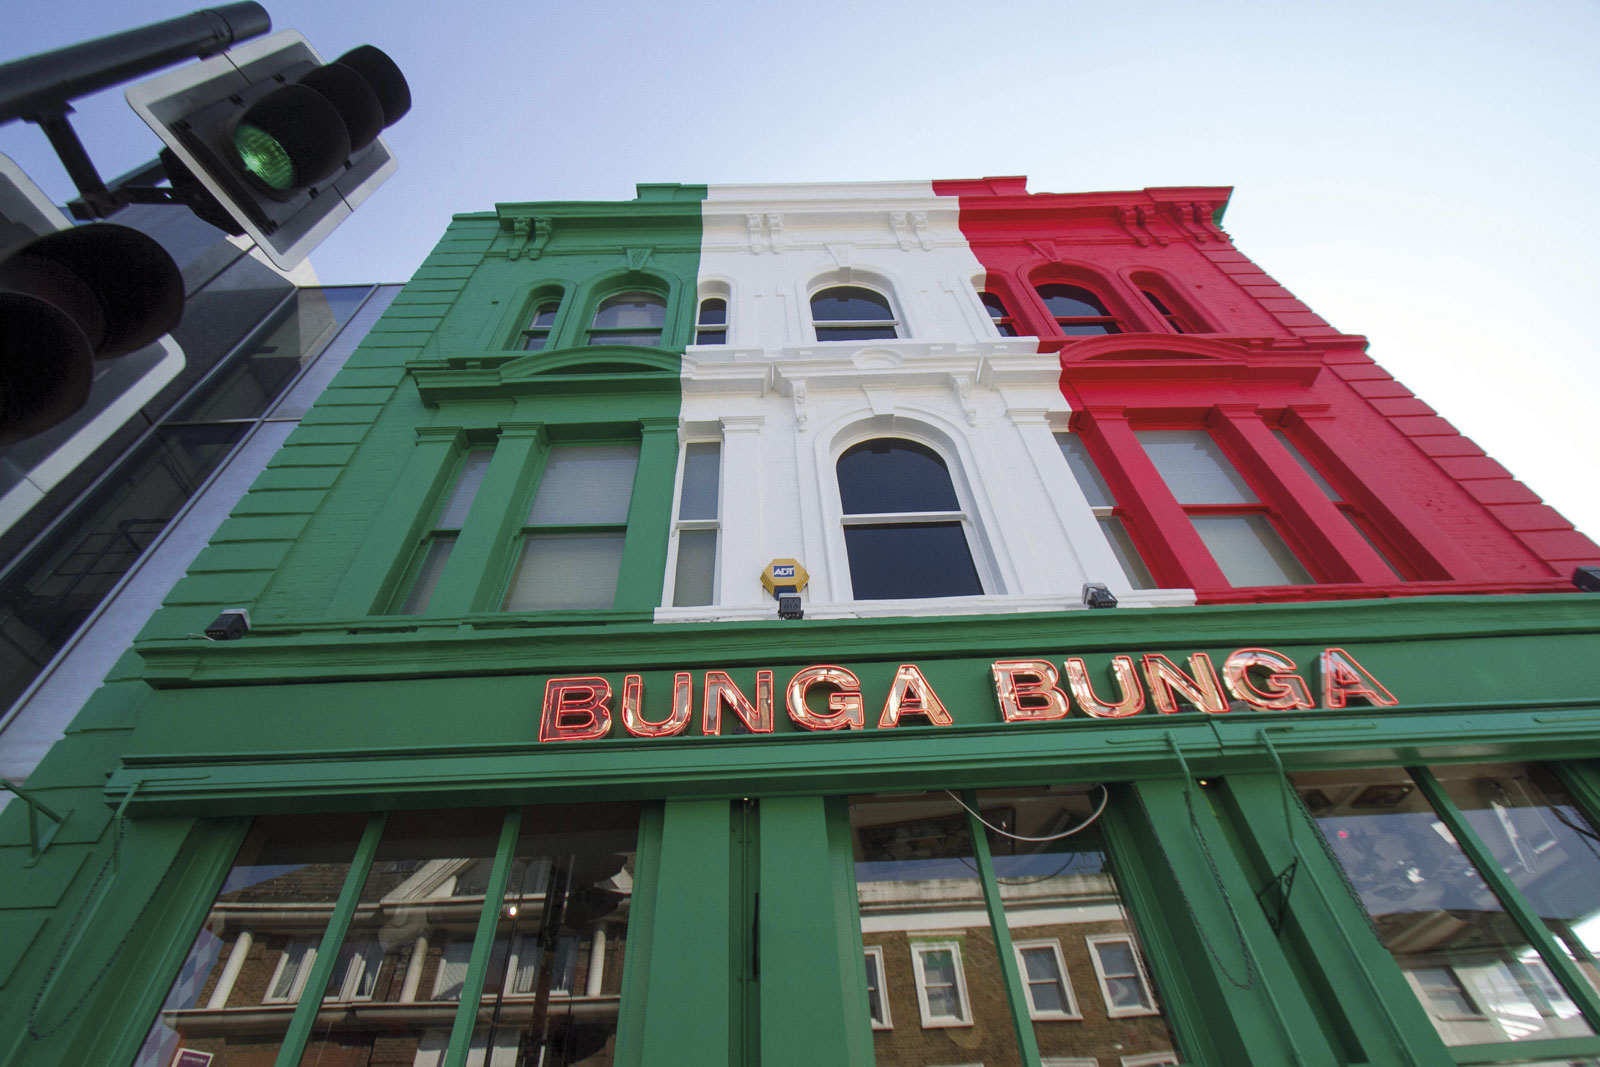 Battersea London,UK. 6th June 2016. The owners of Bunga Bunga an Italian themed bar in Battersea London have painted the building exterior with a bold red, white and green colour scheme the national colours of Italy for the 2016 European championship to